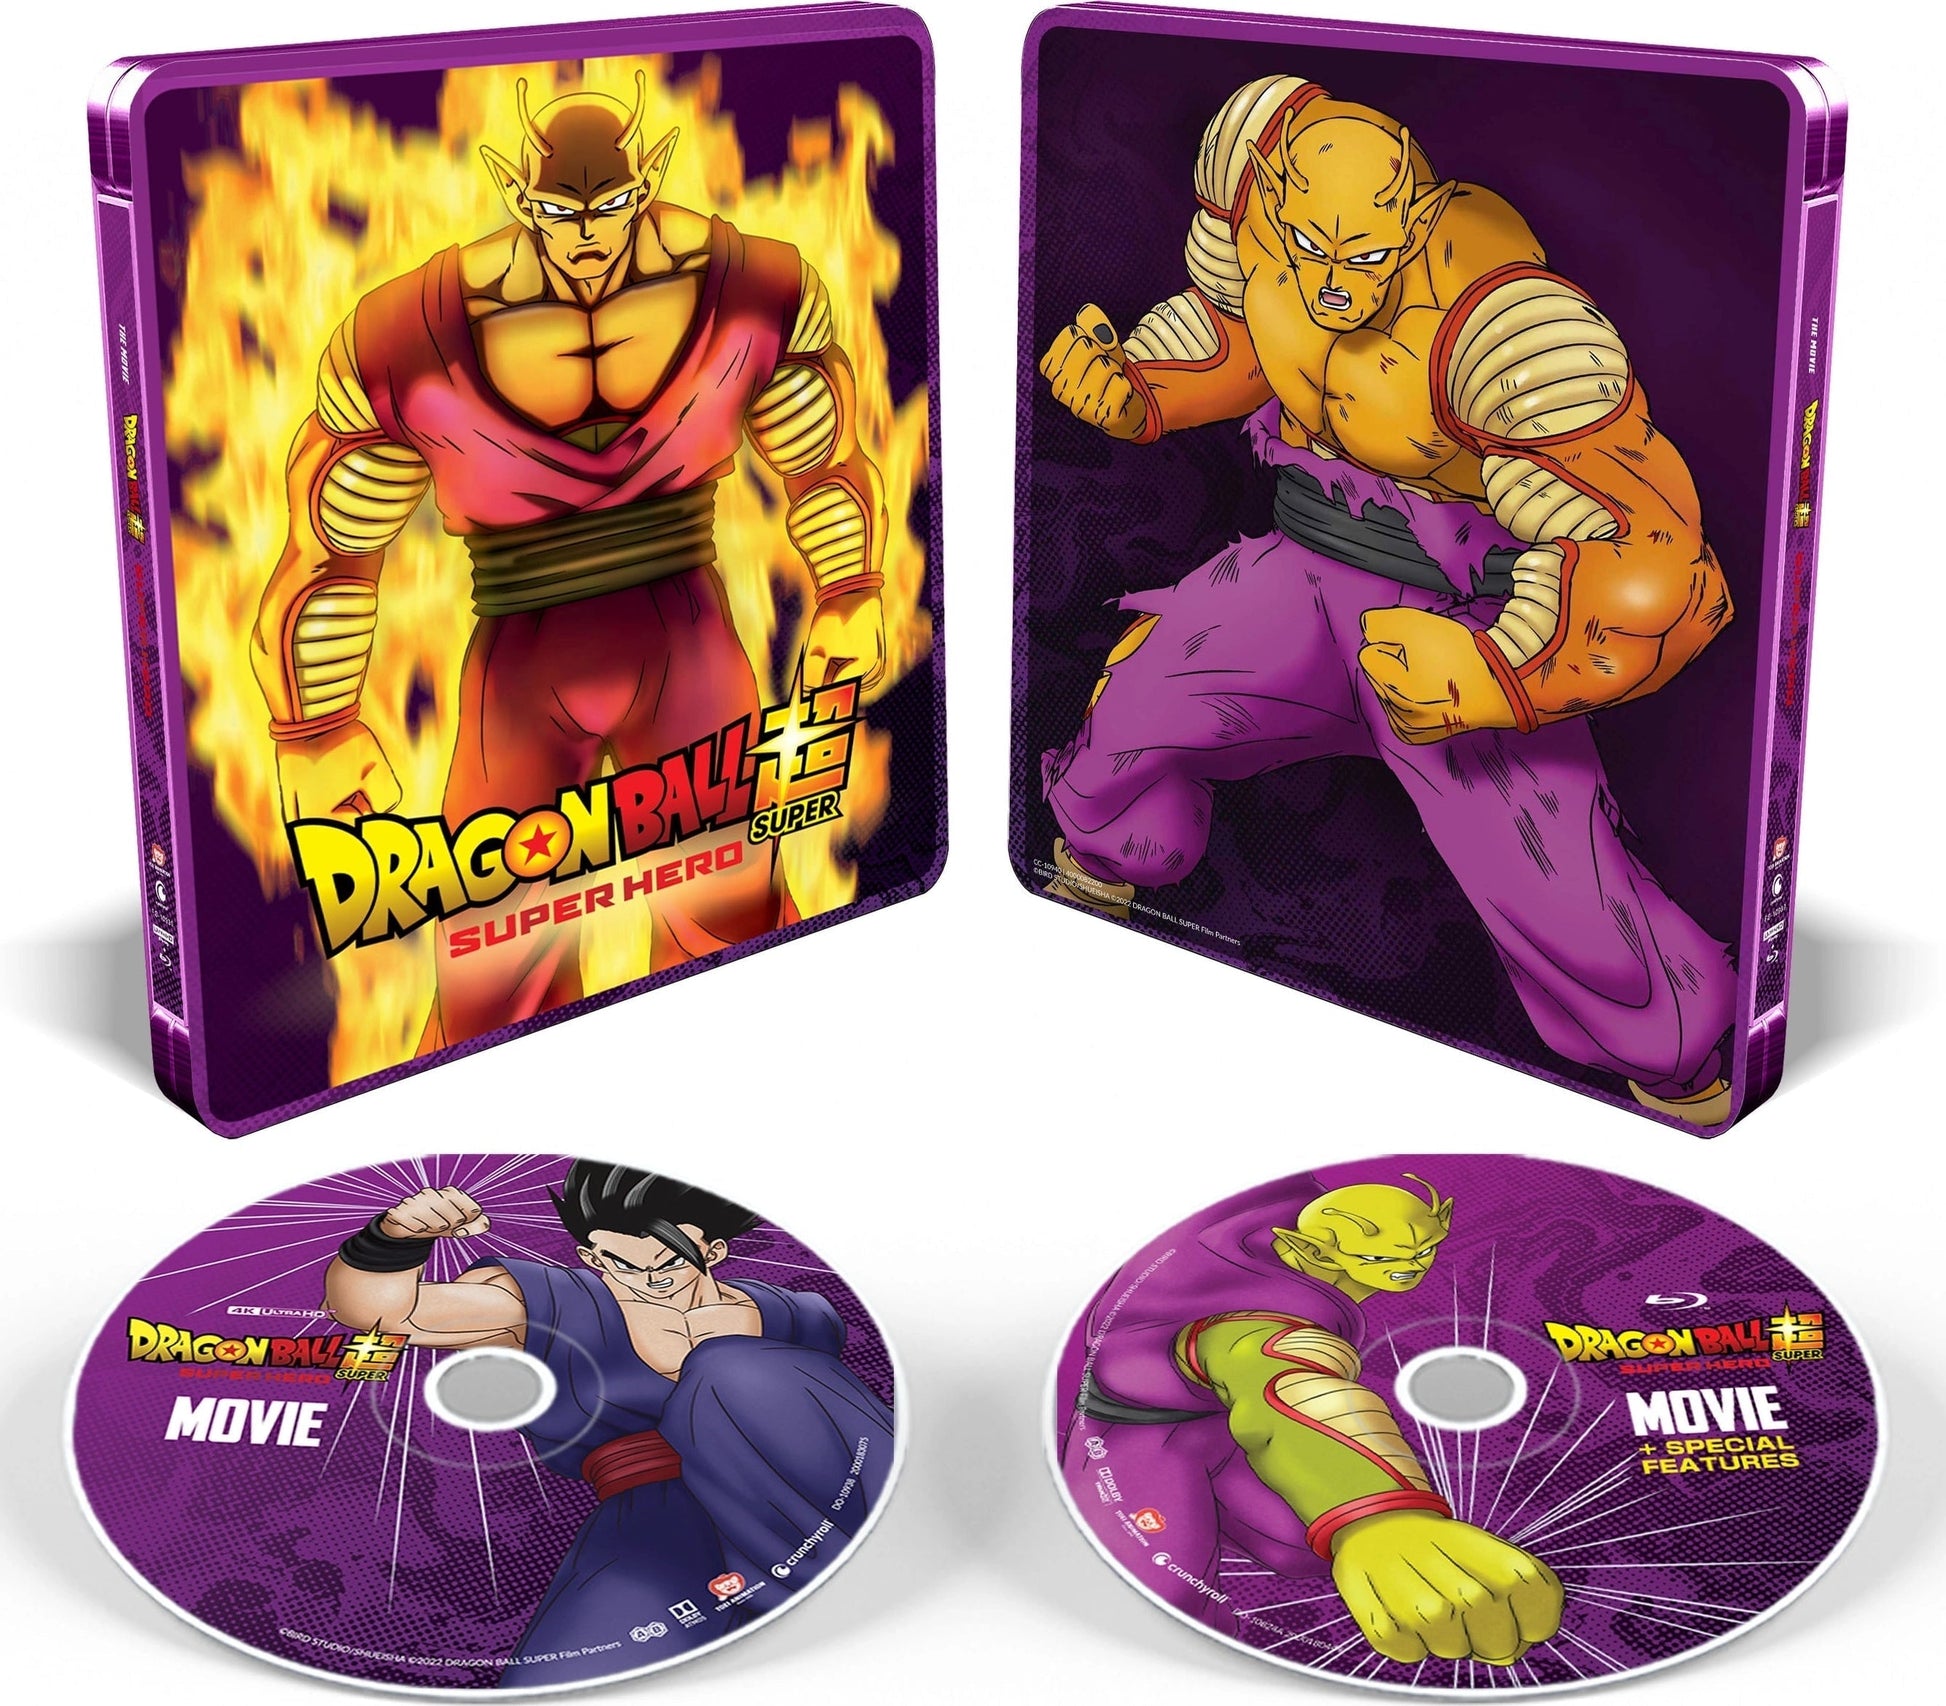  Dragon Ball Super: Super Hero - The Movie - Blu-ray & DVD -  Limited Collector's Edition : Movies & TV